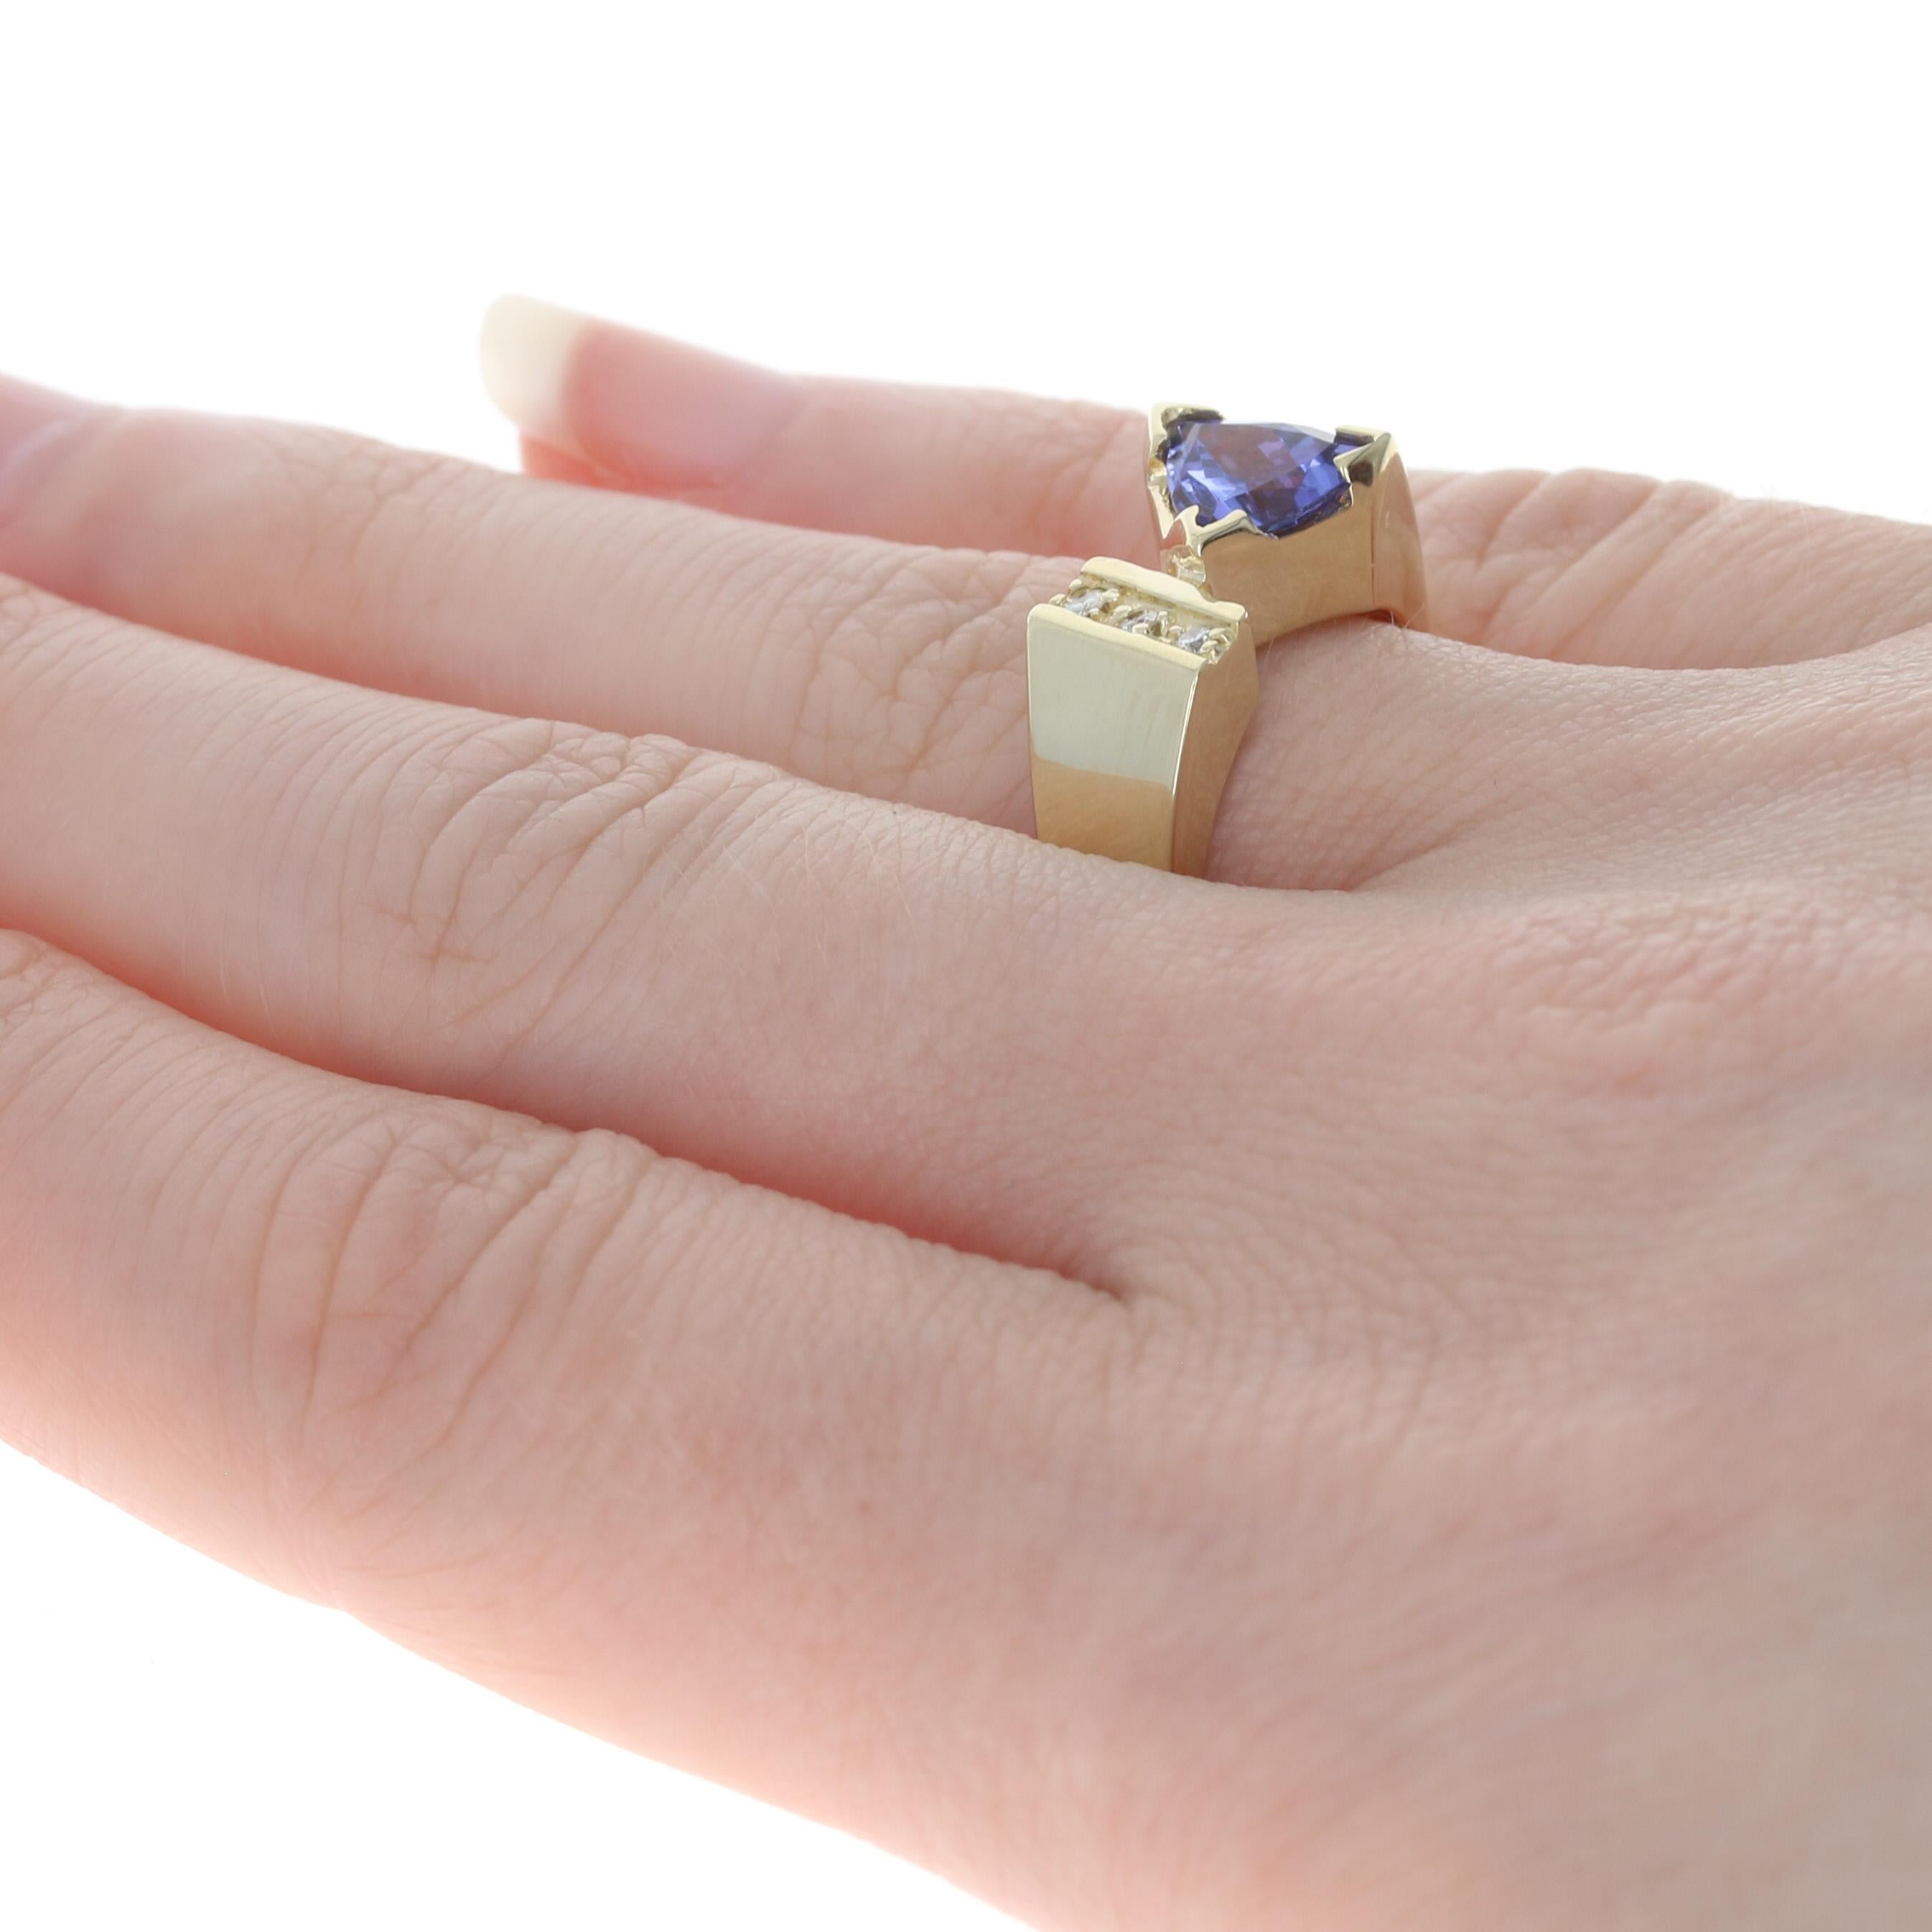 Size: 6 1/2
Sizing Fee: Down or Up 1 size for $25

Metal Content: 14k Yellow Gold

Stone Information: 
Genuine Tanzanite
Treatment: Routinely Enhanced
Carat(s): 1.80ct
Cut: Trillion
Color: Purple 

Natural Diamonds
Carat(s): .09ctw
Cut: Round